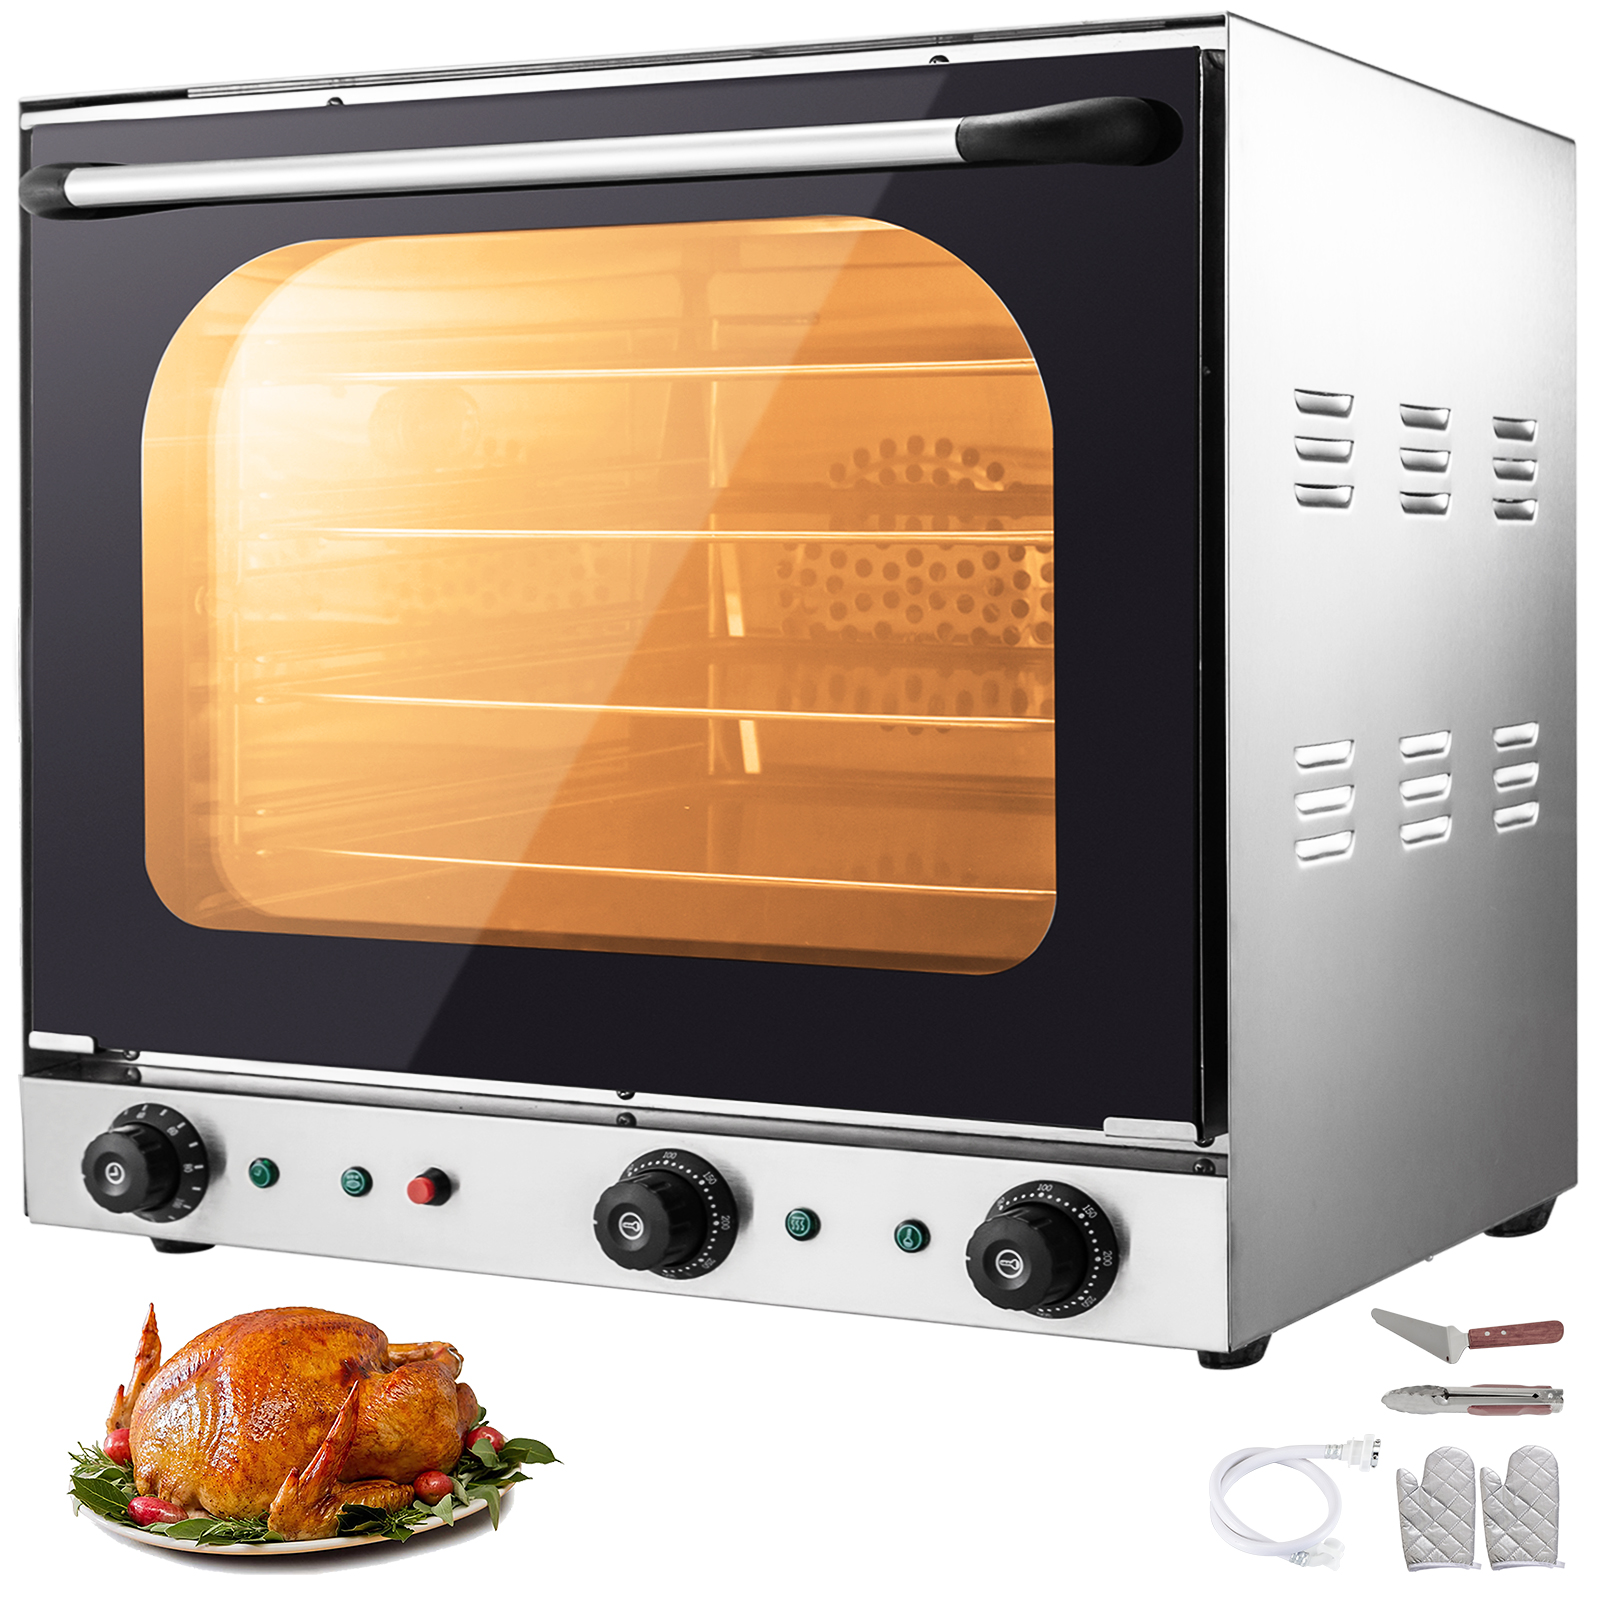 https://d2qc09rl1gfuof.cloudfront.net/product/RFXHLDPW000000001/toaster-oven-m100-1.2.jpg